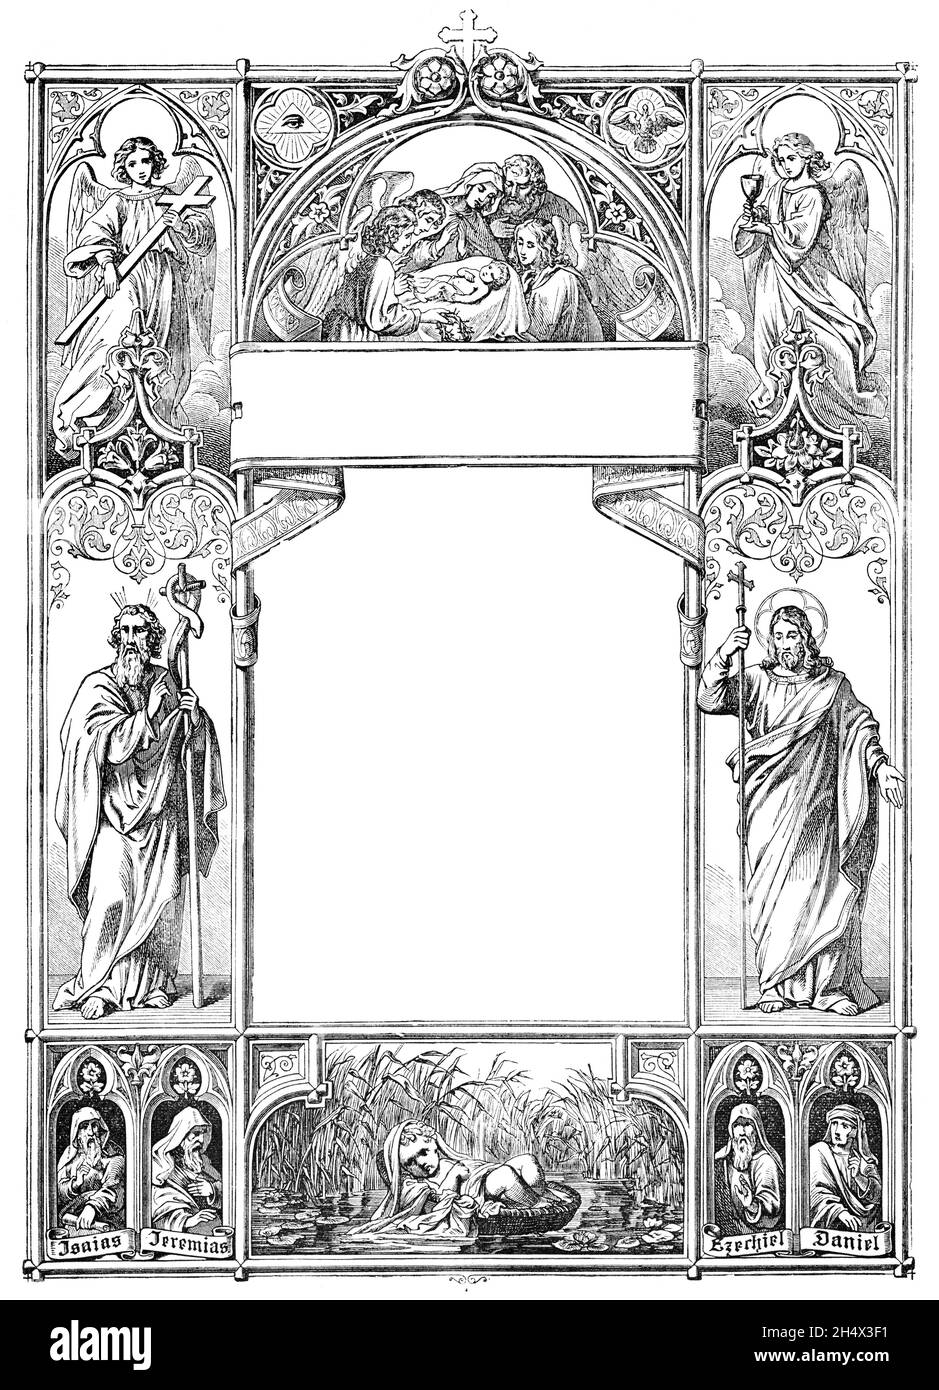 Cover or Book Jacket Frame with Saints, Prophets, Nativity Scene And Baby Moses. Bible, Old and New testament. Vintage Antique Drawing Stock Photo